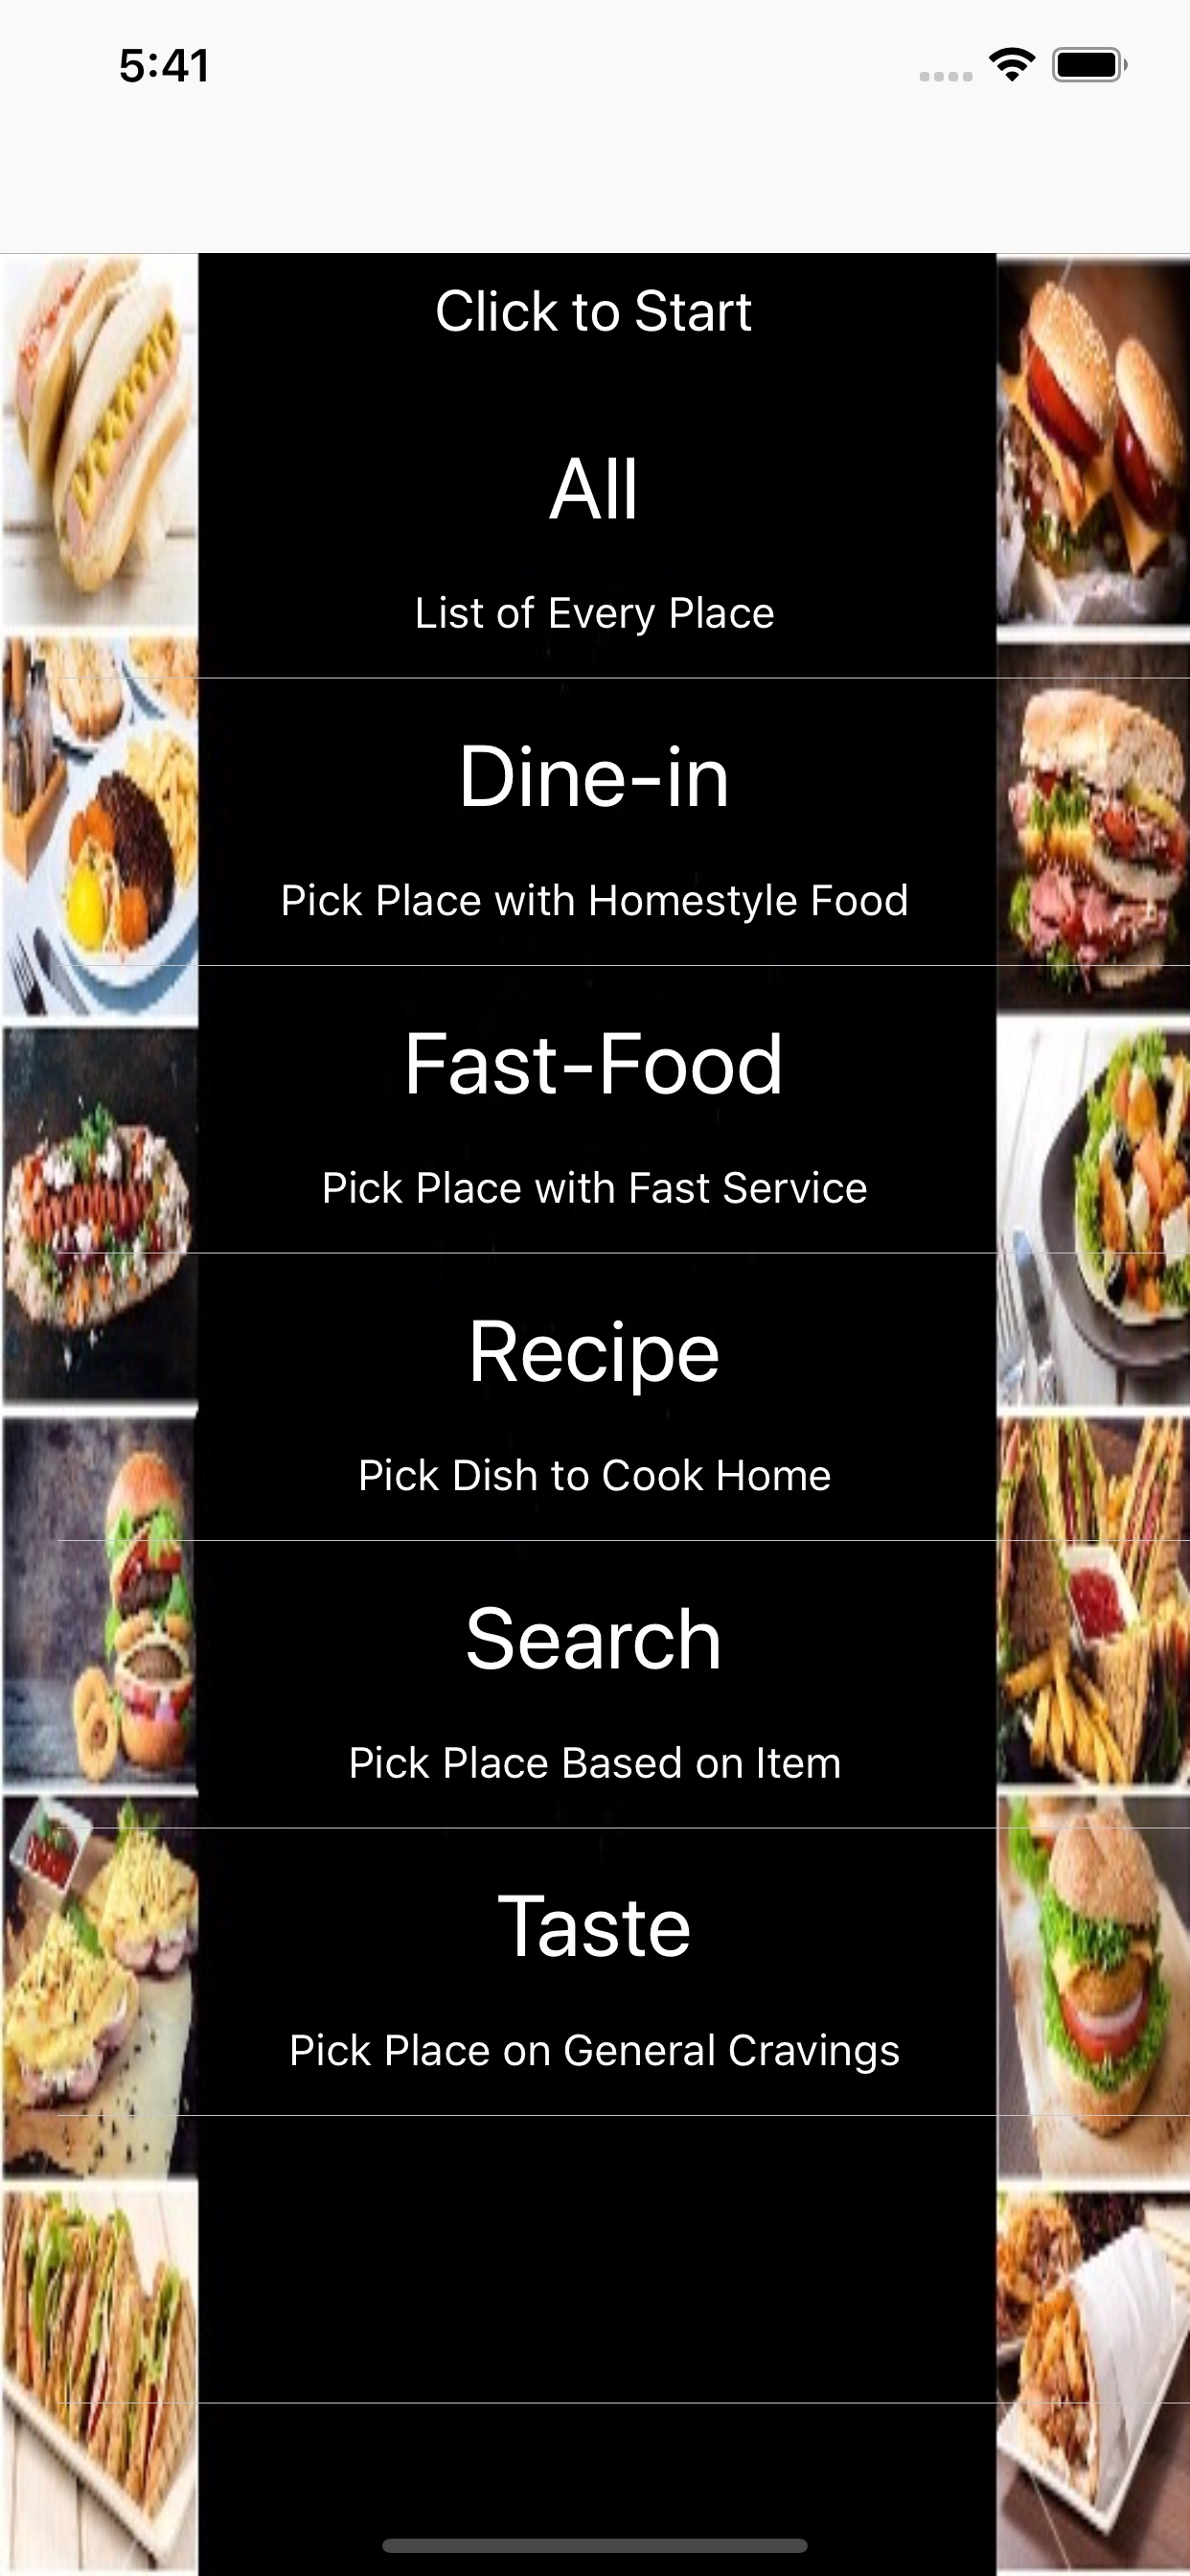 Appetite- Find Nearby Food